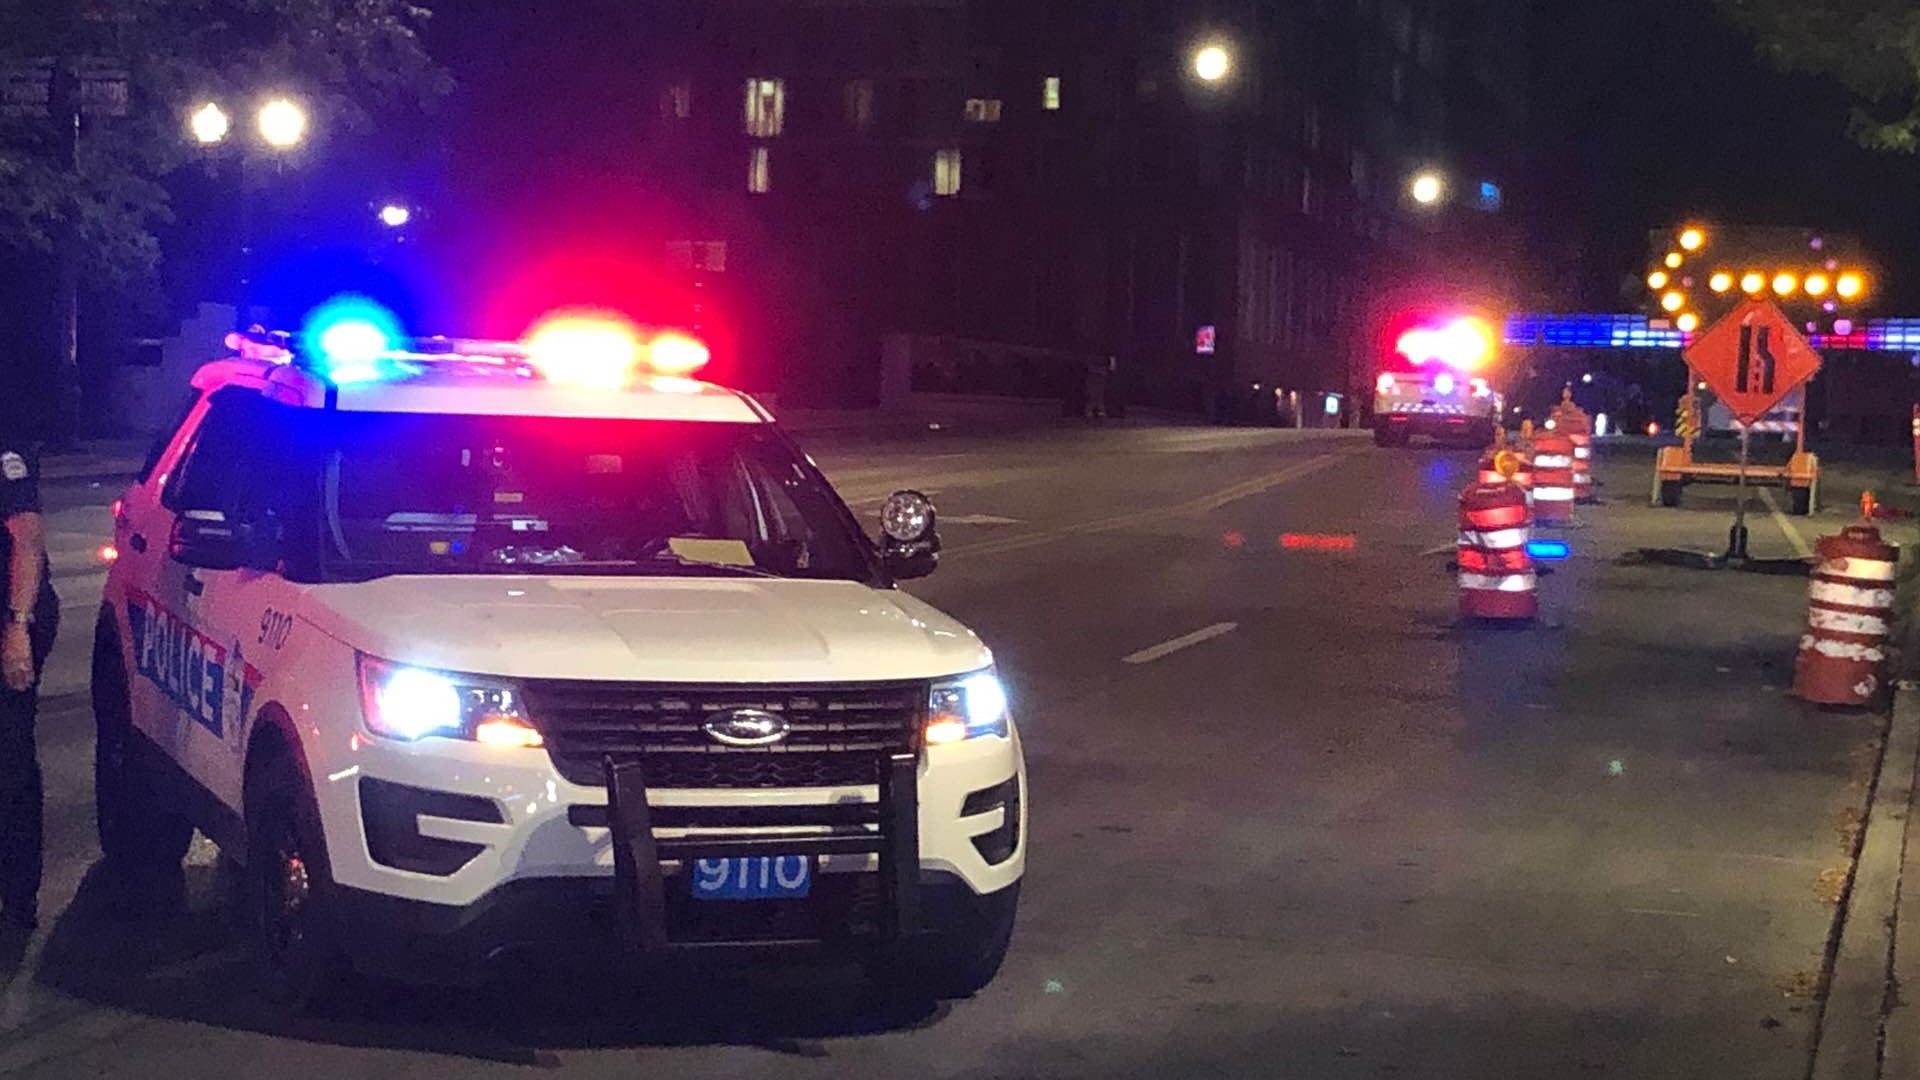 Columbus police said the person was hit near Nationwide Boulevard and North High Street around 10:10 p.m.